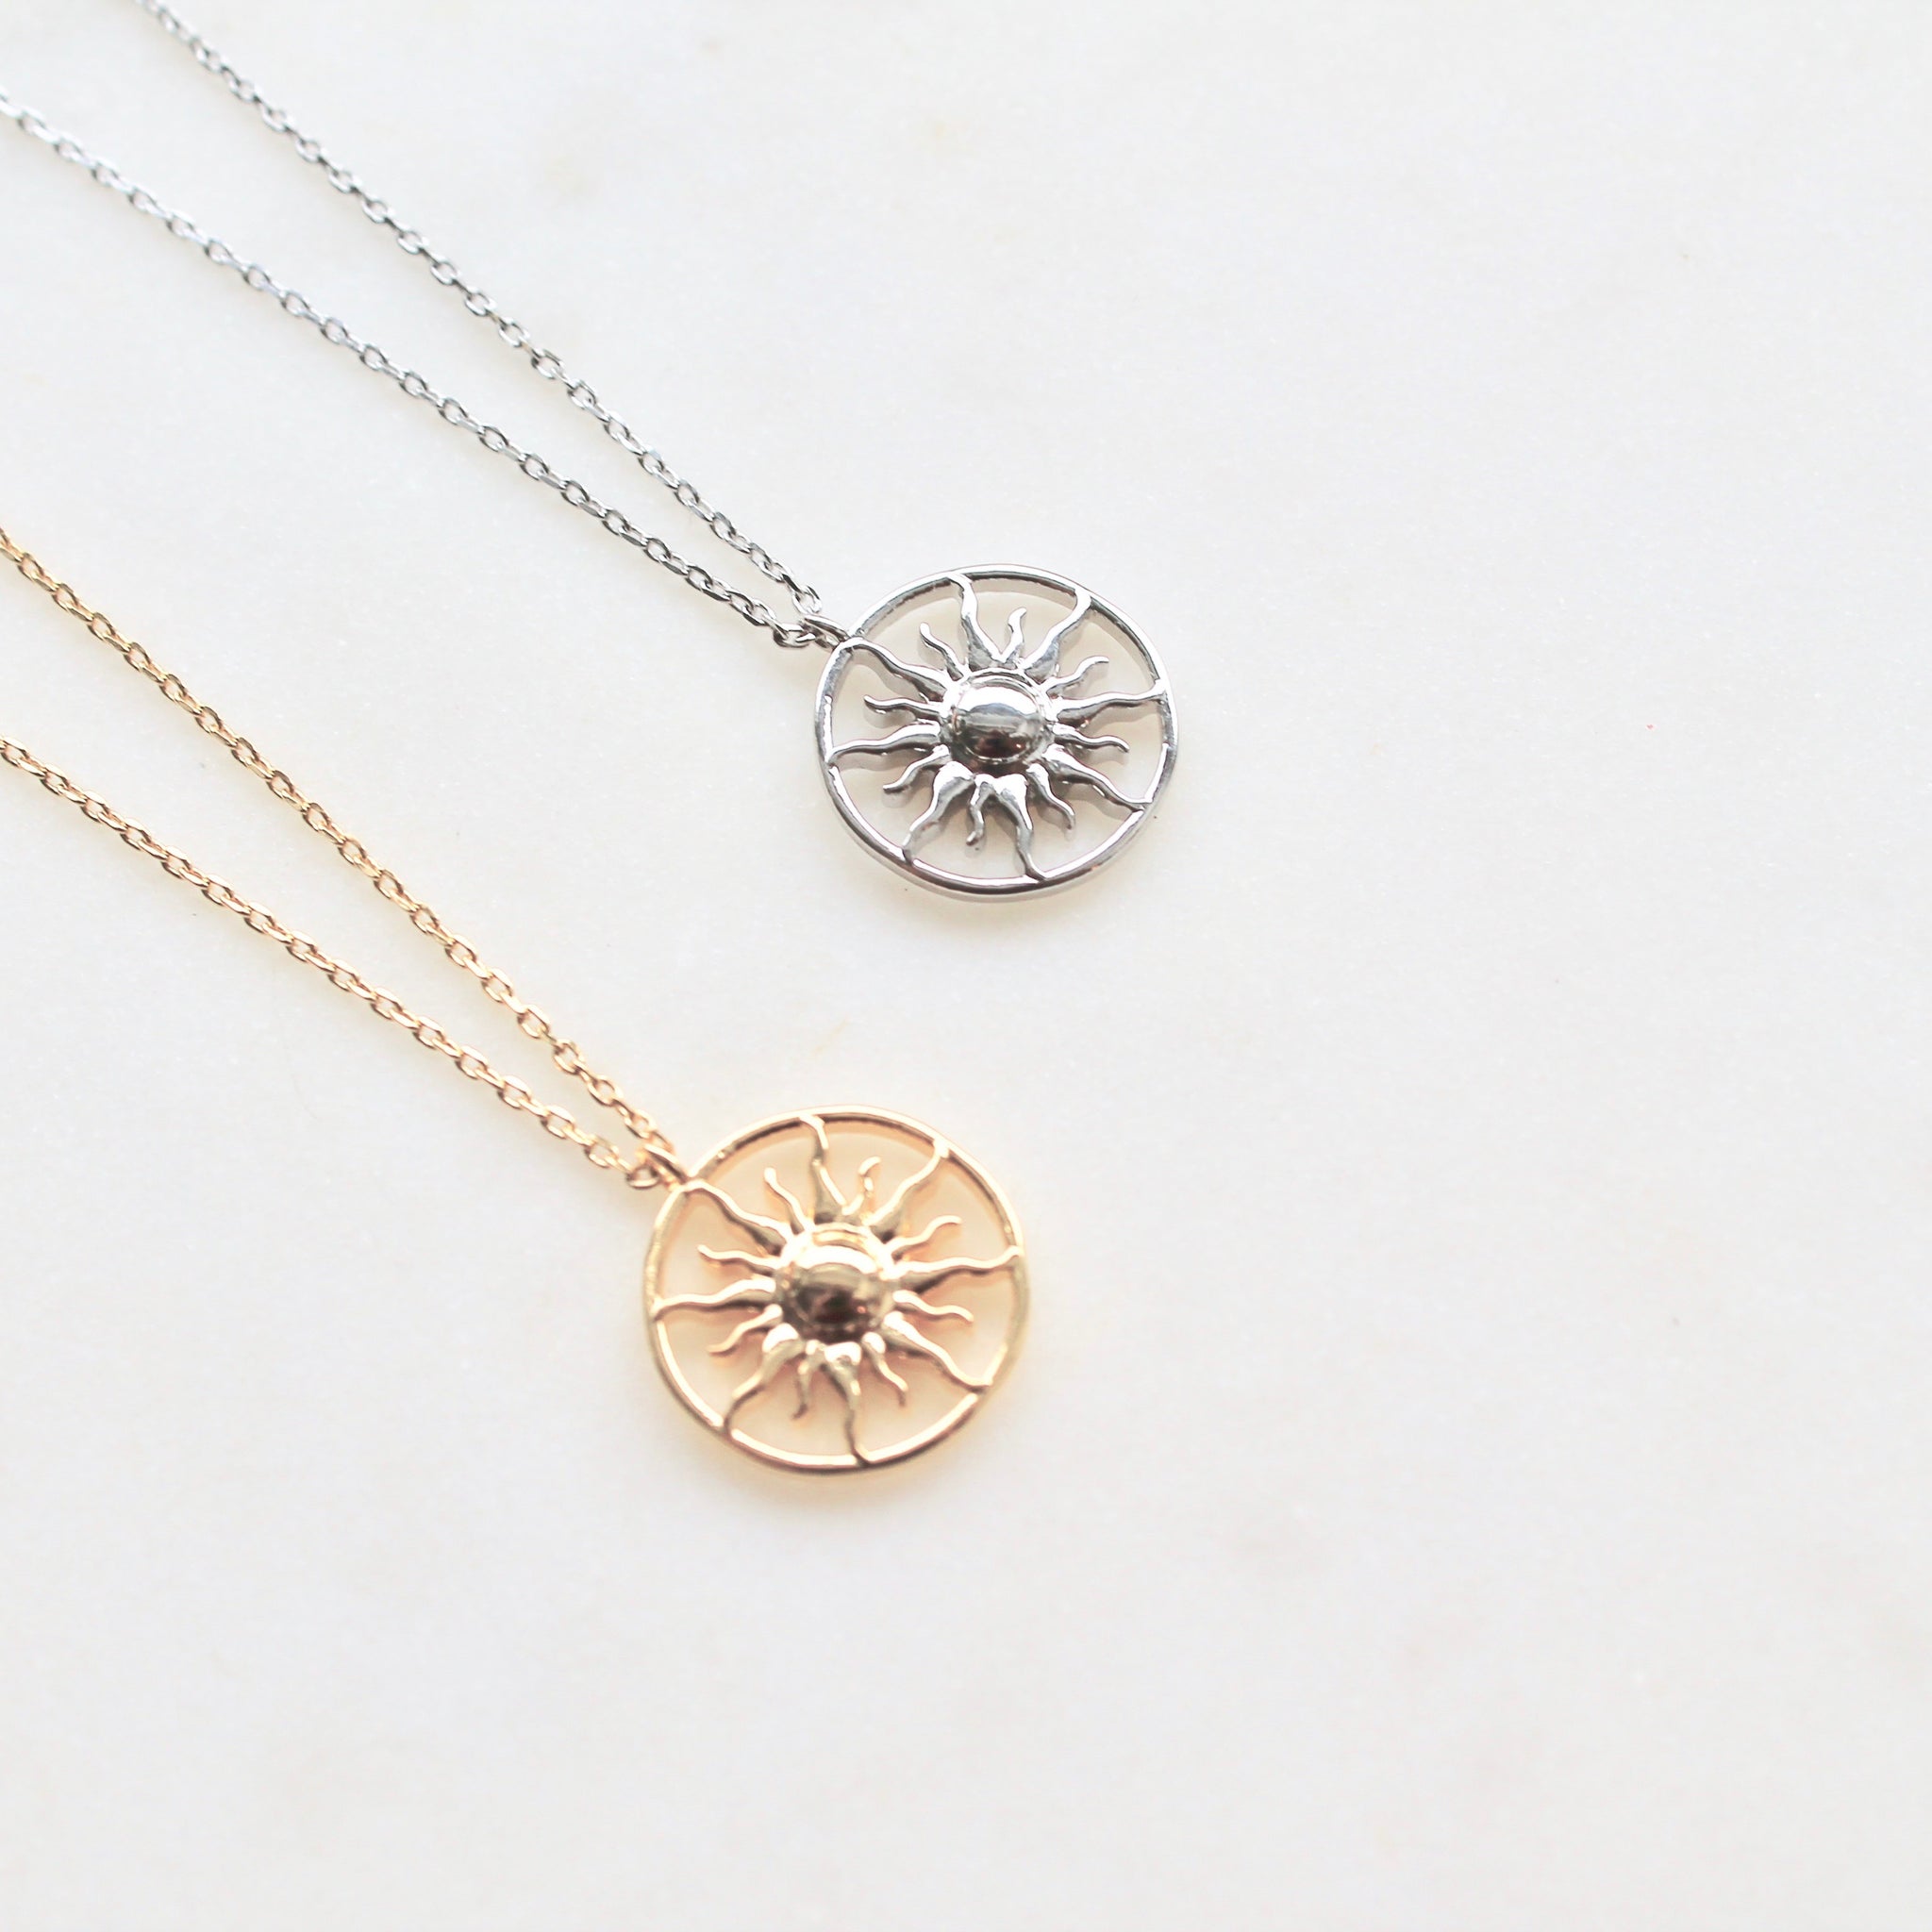 Sun disc dainty necklace - Lily Lough Jewelry